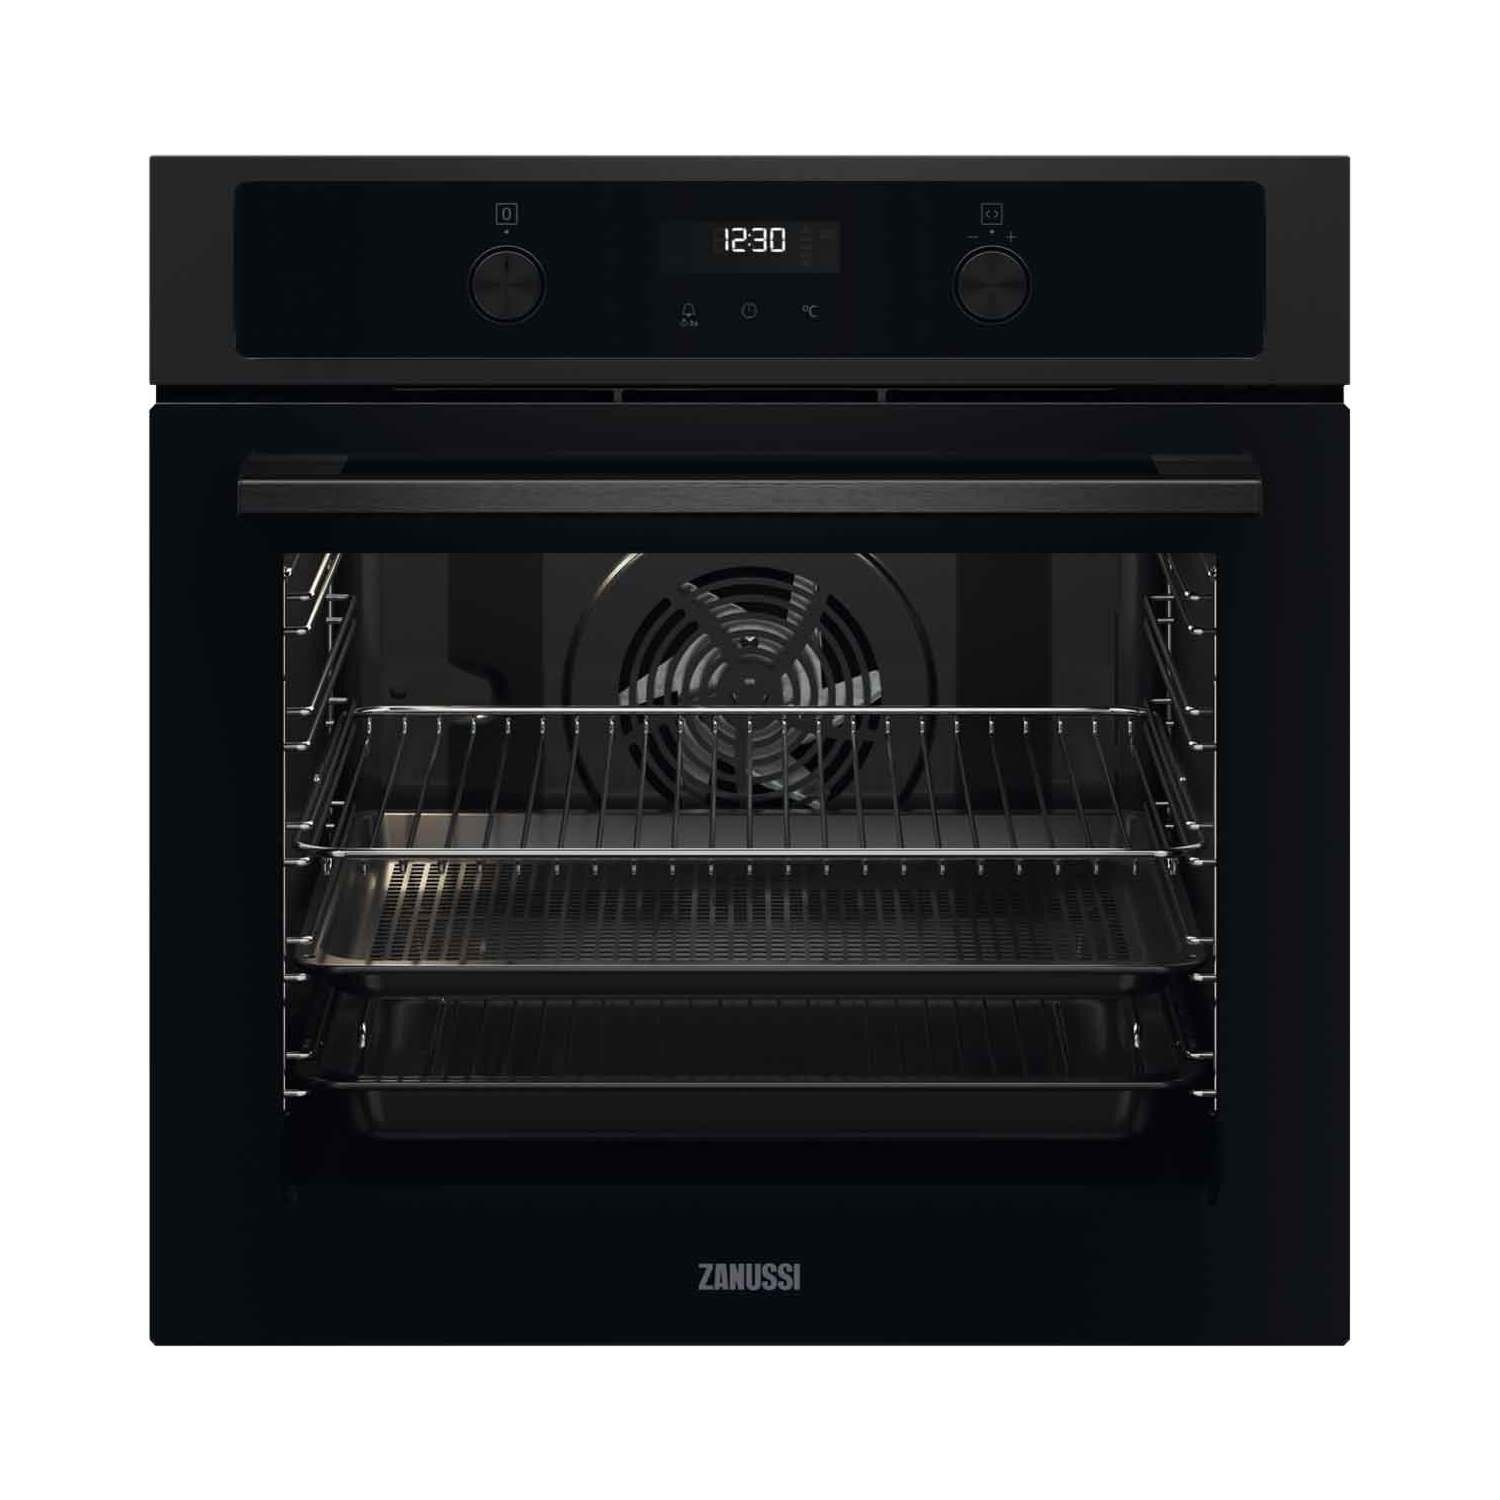 Refurbished Zanussi Series 40 ZOHNA7K1 AirFry Single Built In Electric Oven Black